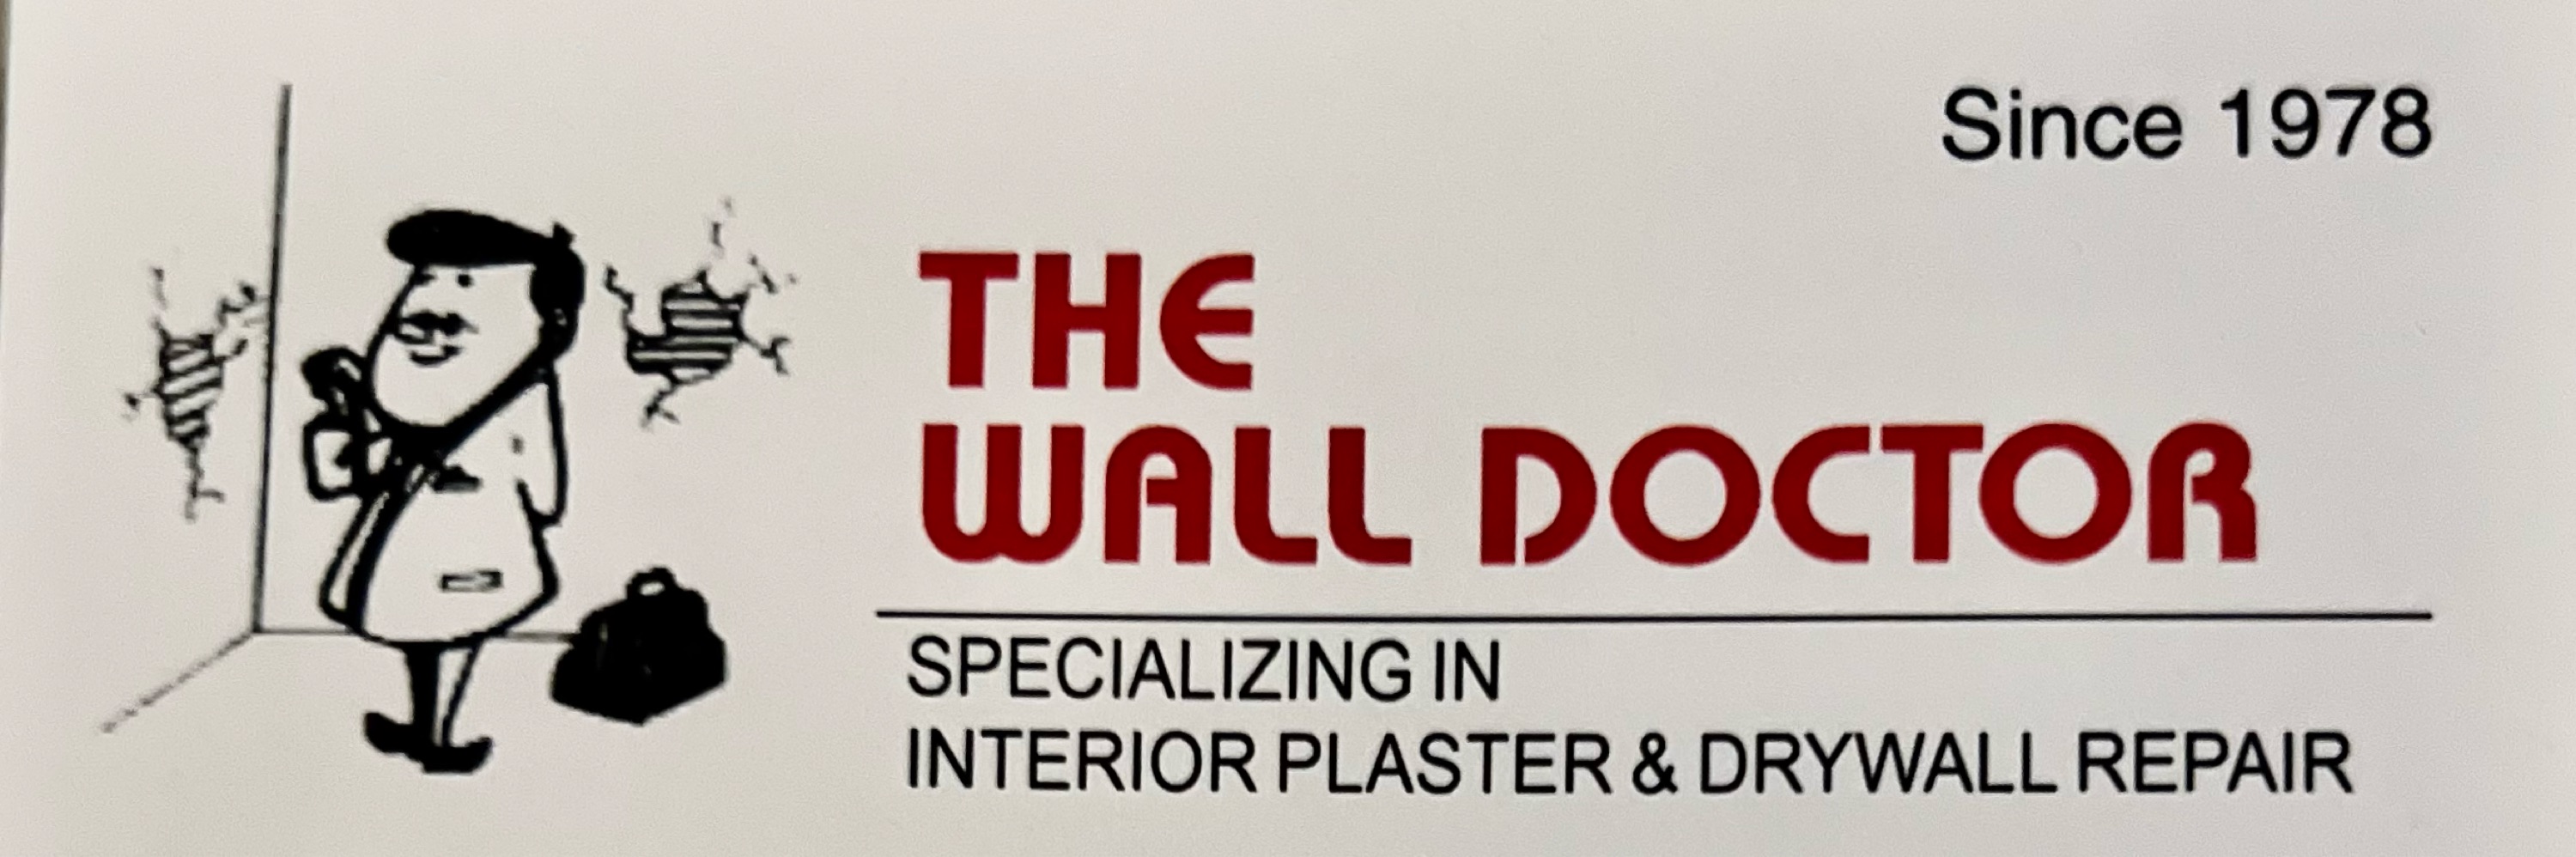 The Wall Doctor Logo